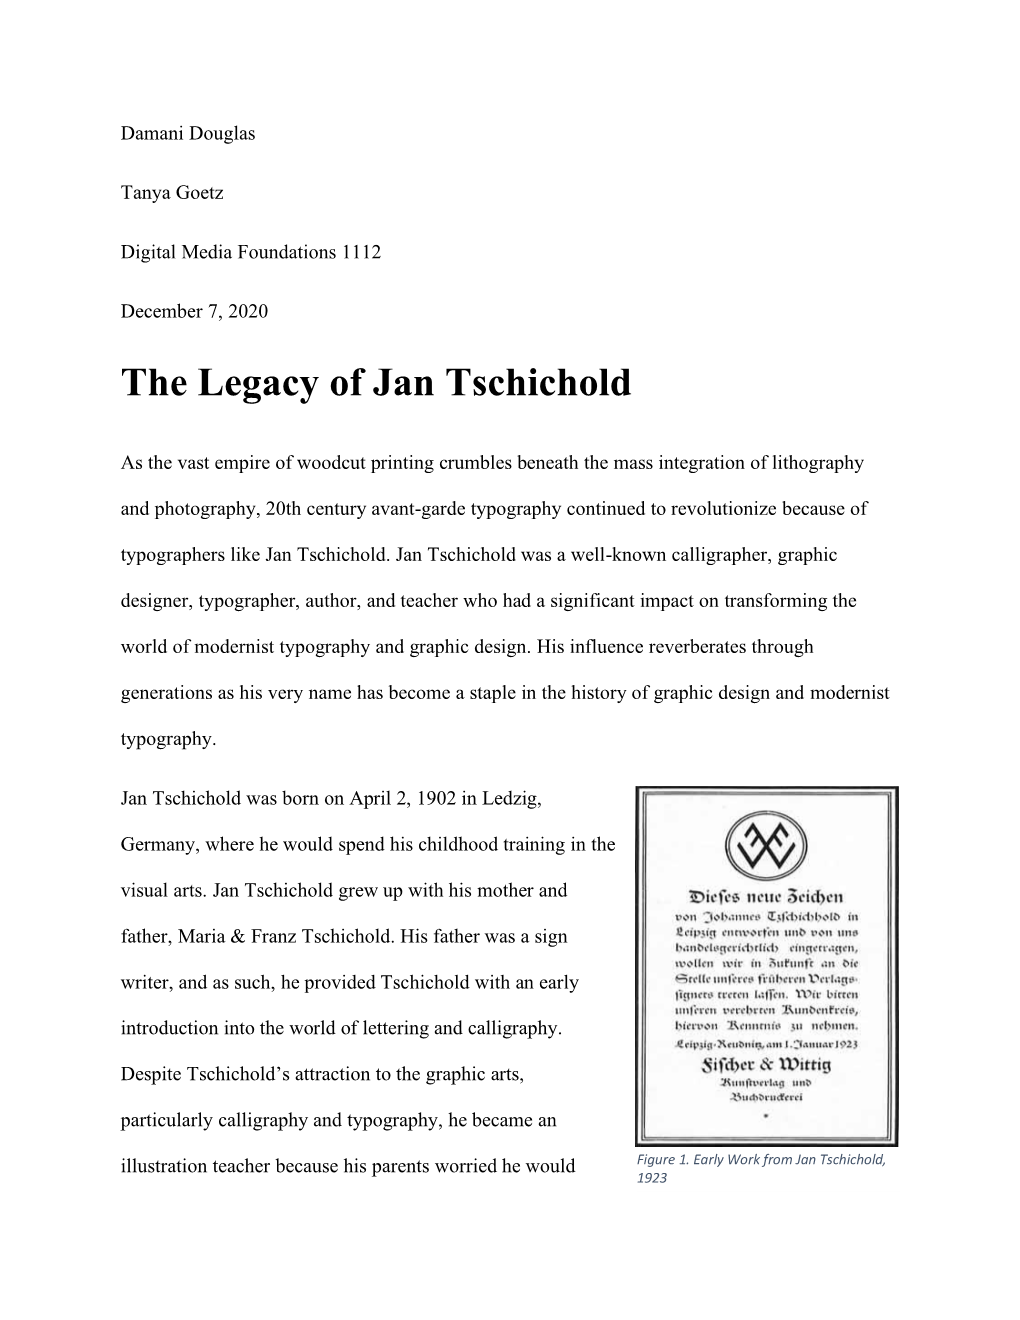 The Legacy of Jan Tschichold